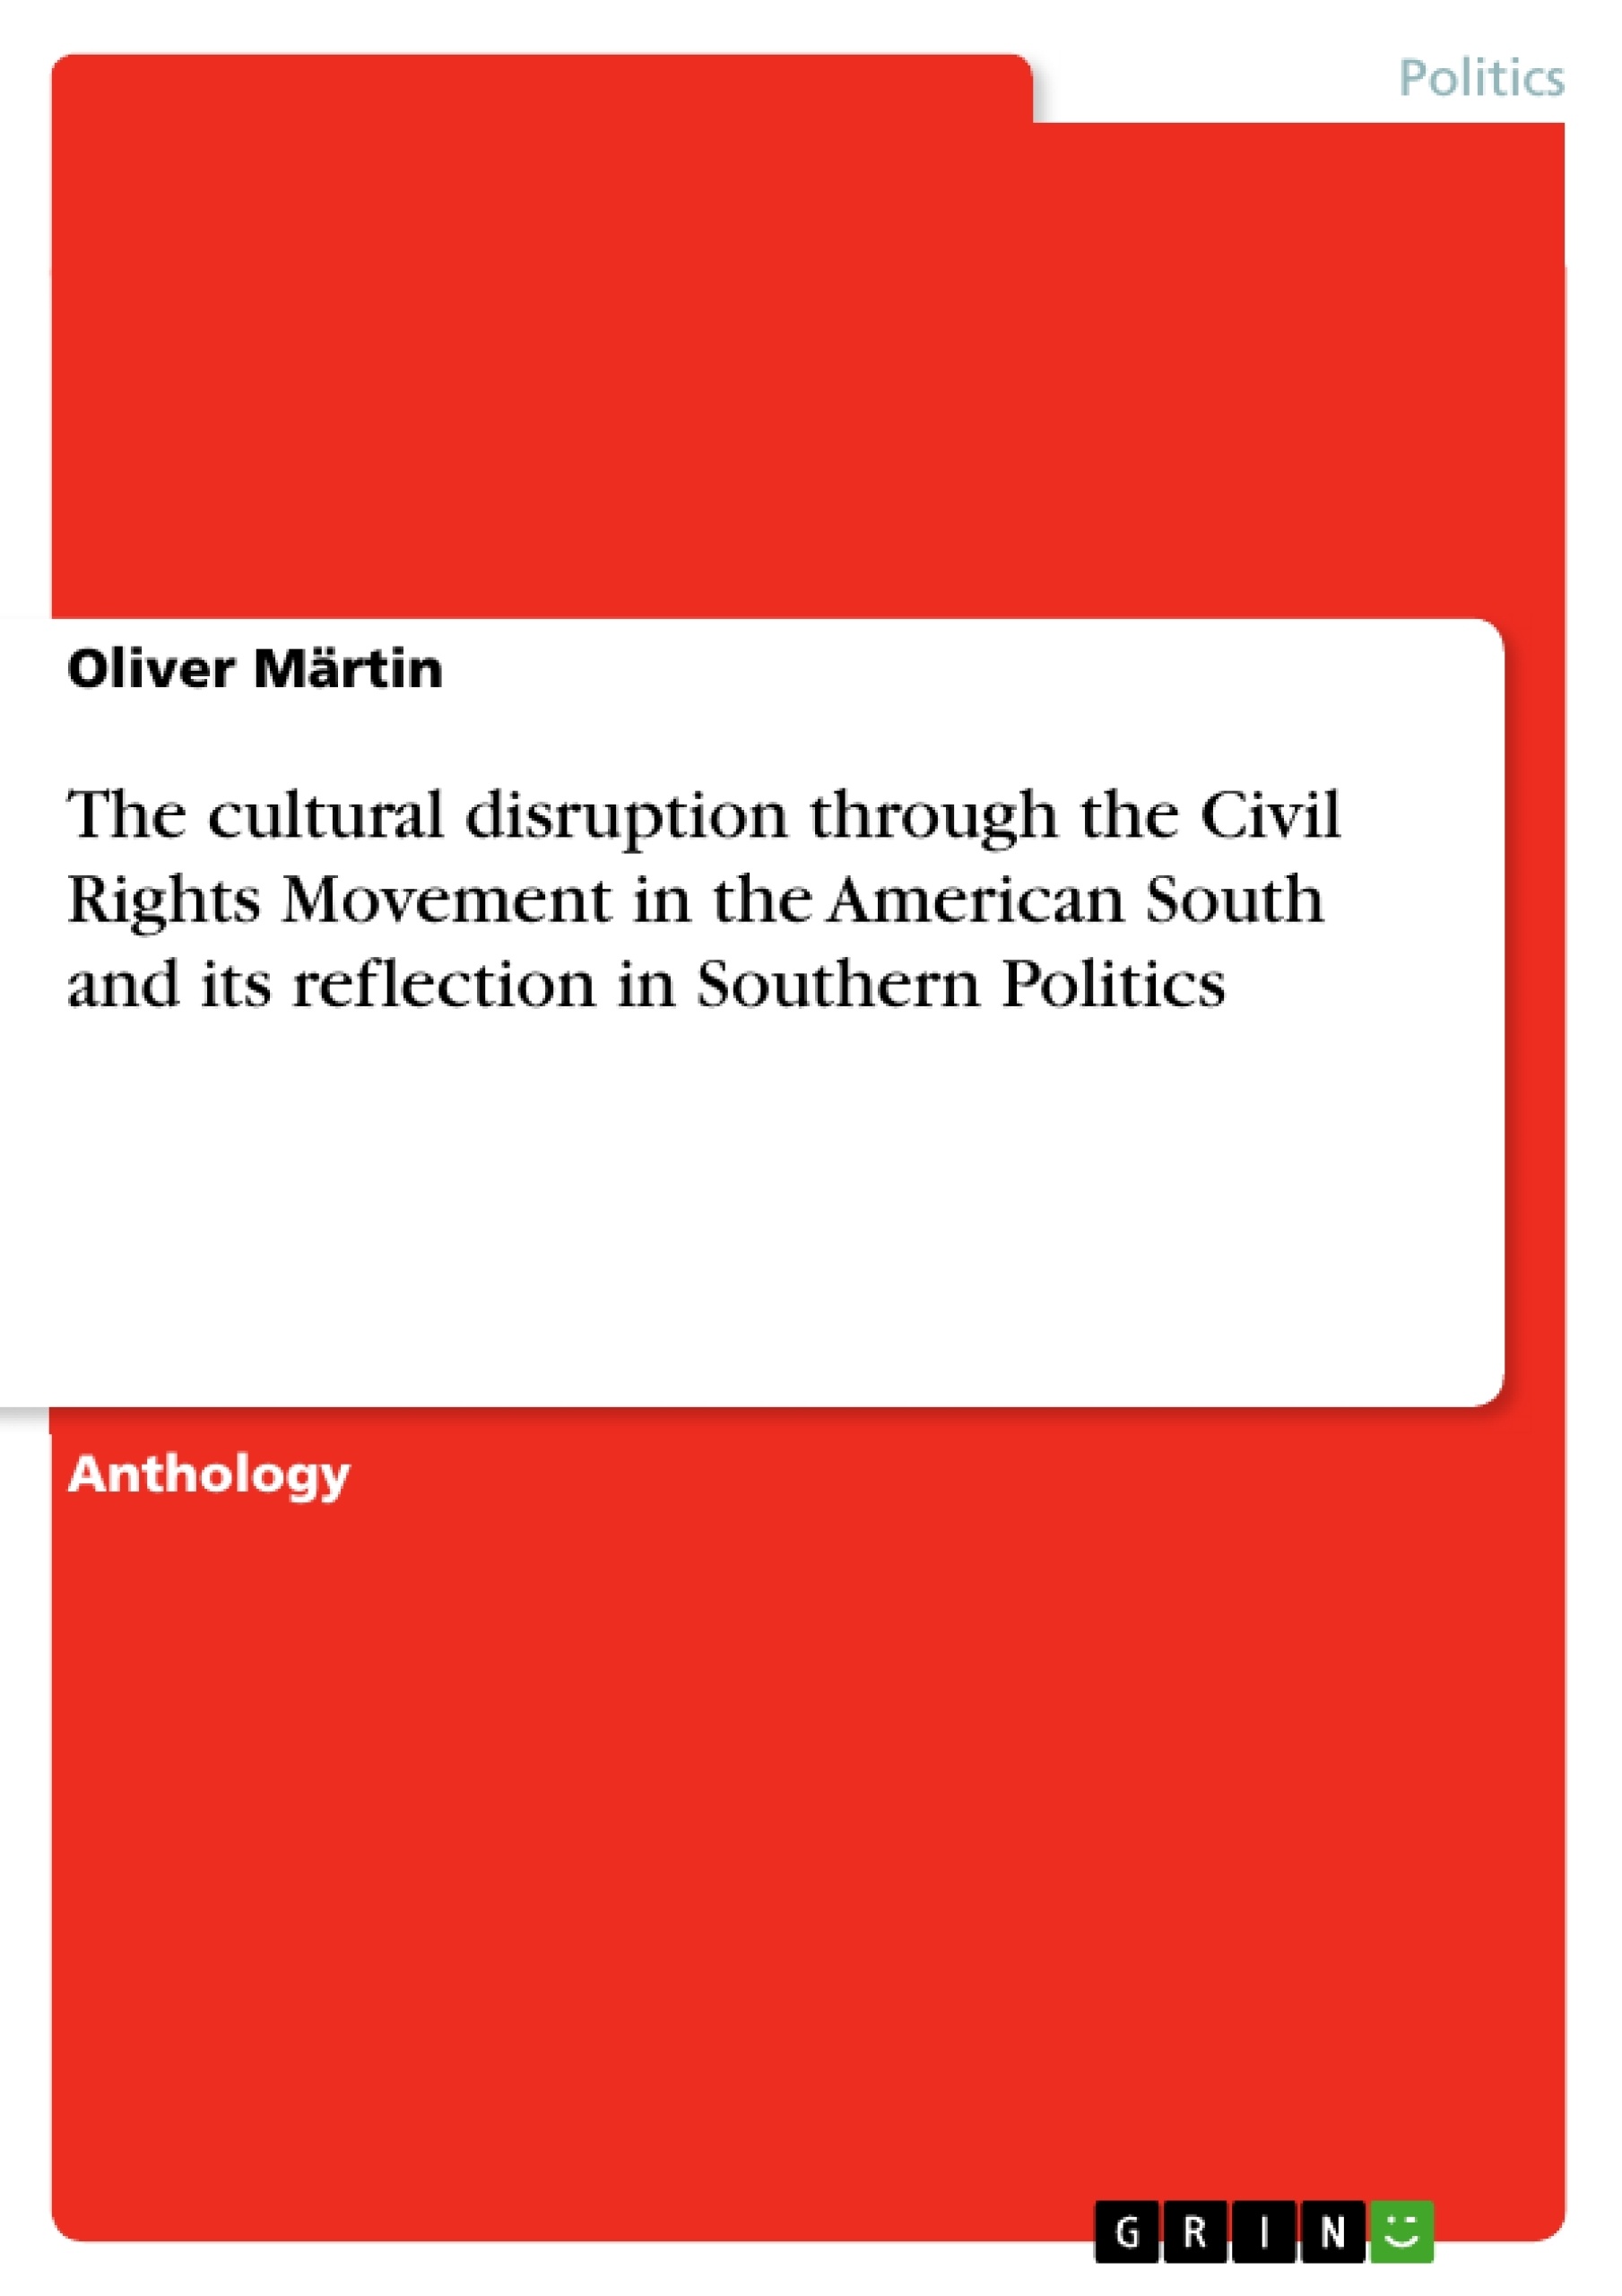 Title: The cultural disruption through the Civil Rights Movement in the American South and its reflection in Southern Politics